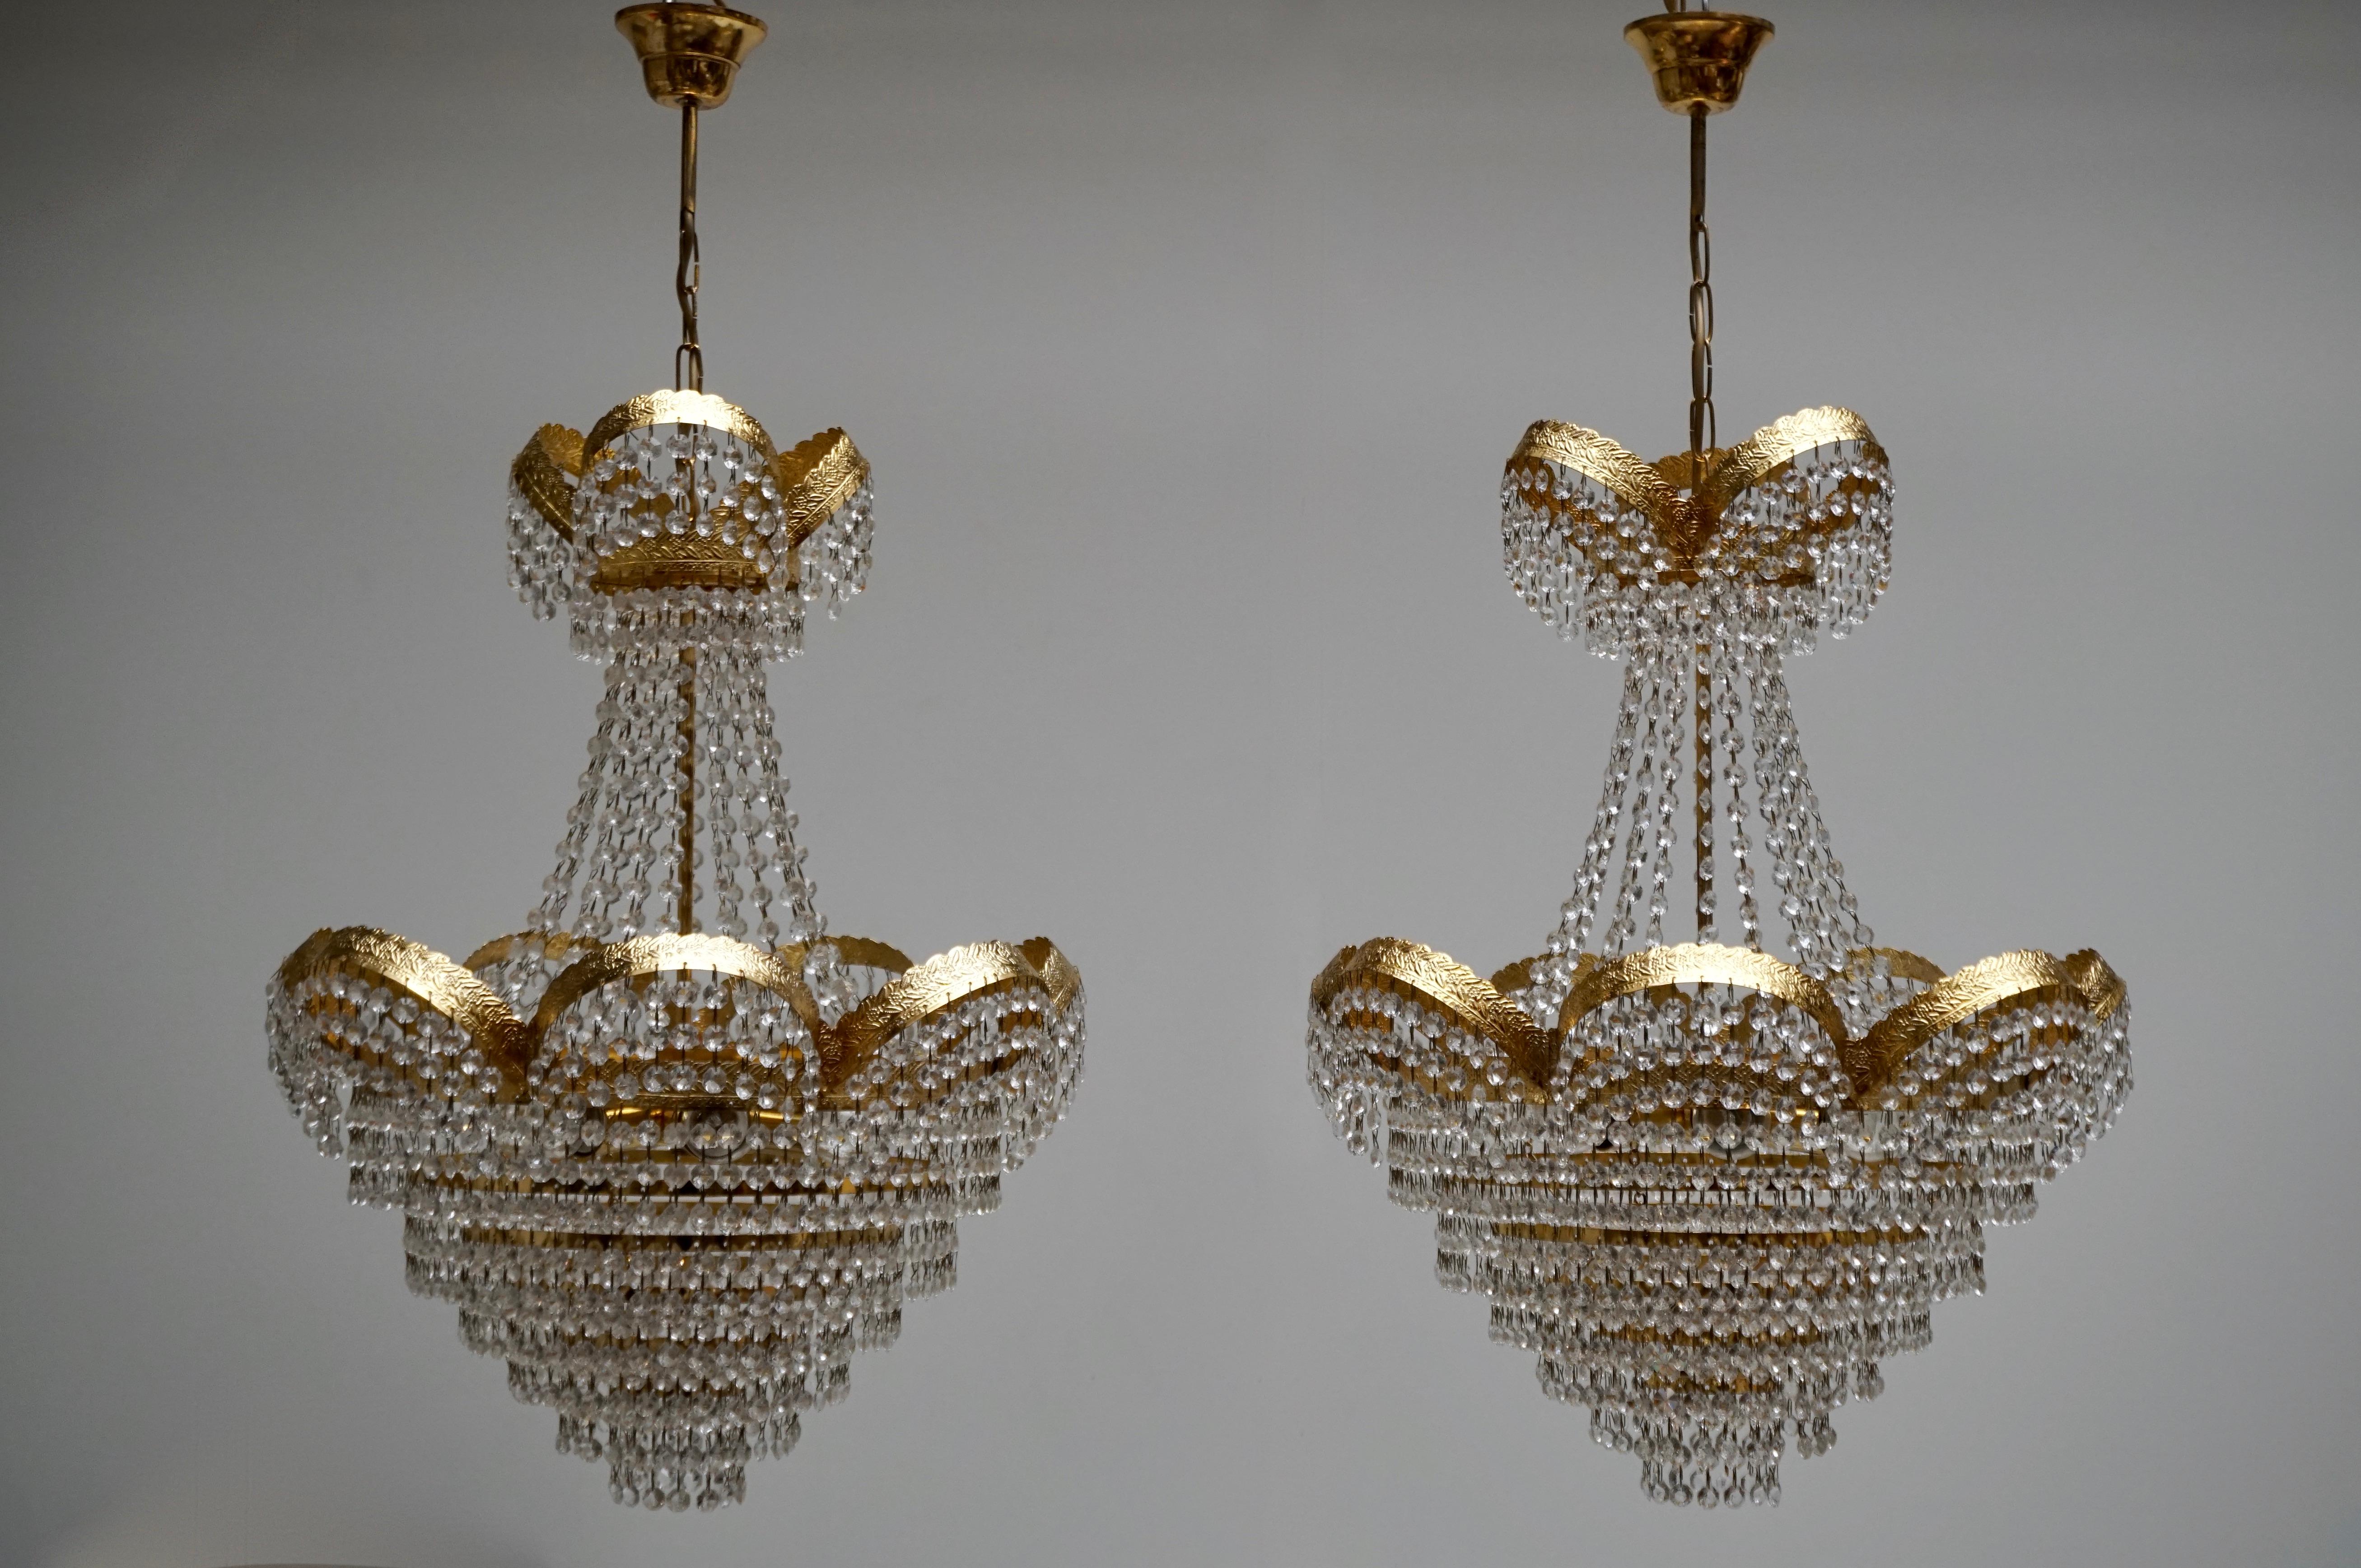 One Elegant crystal and brass chandelier from the 1950s-1970s.
Please note that price is per item not for the set.
Measures: Diameter 50 cm.
Height fixture 65 cm.
Total height including the chain 90 cm.
The light requires six single E27 screw fit